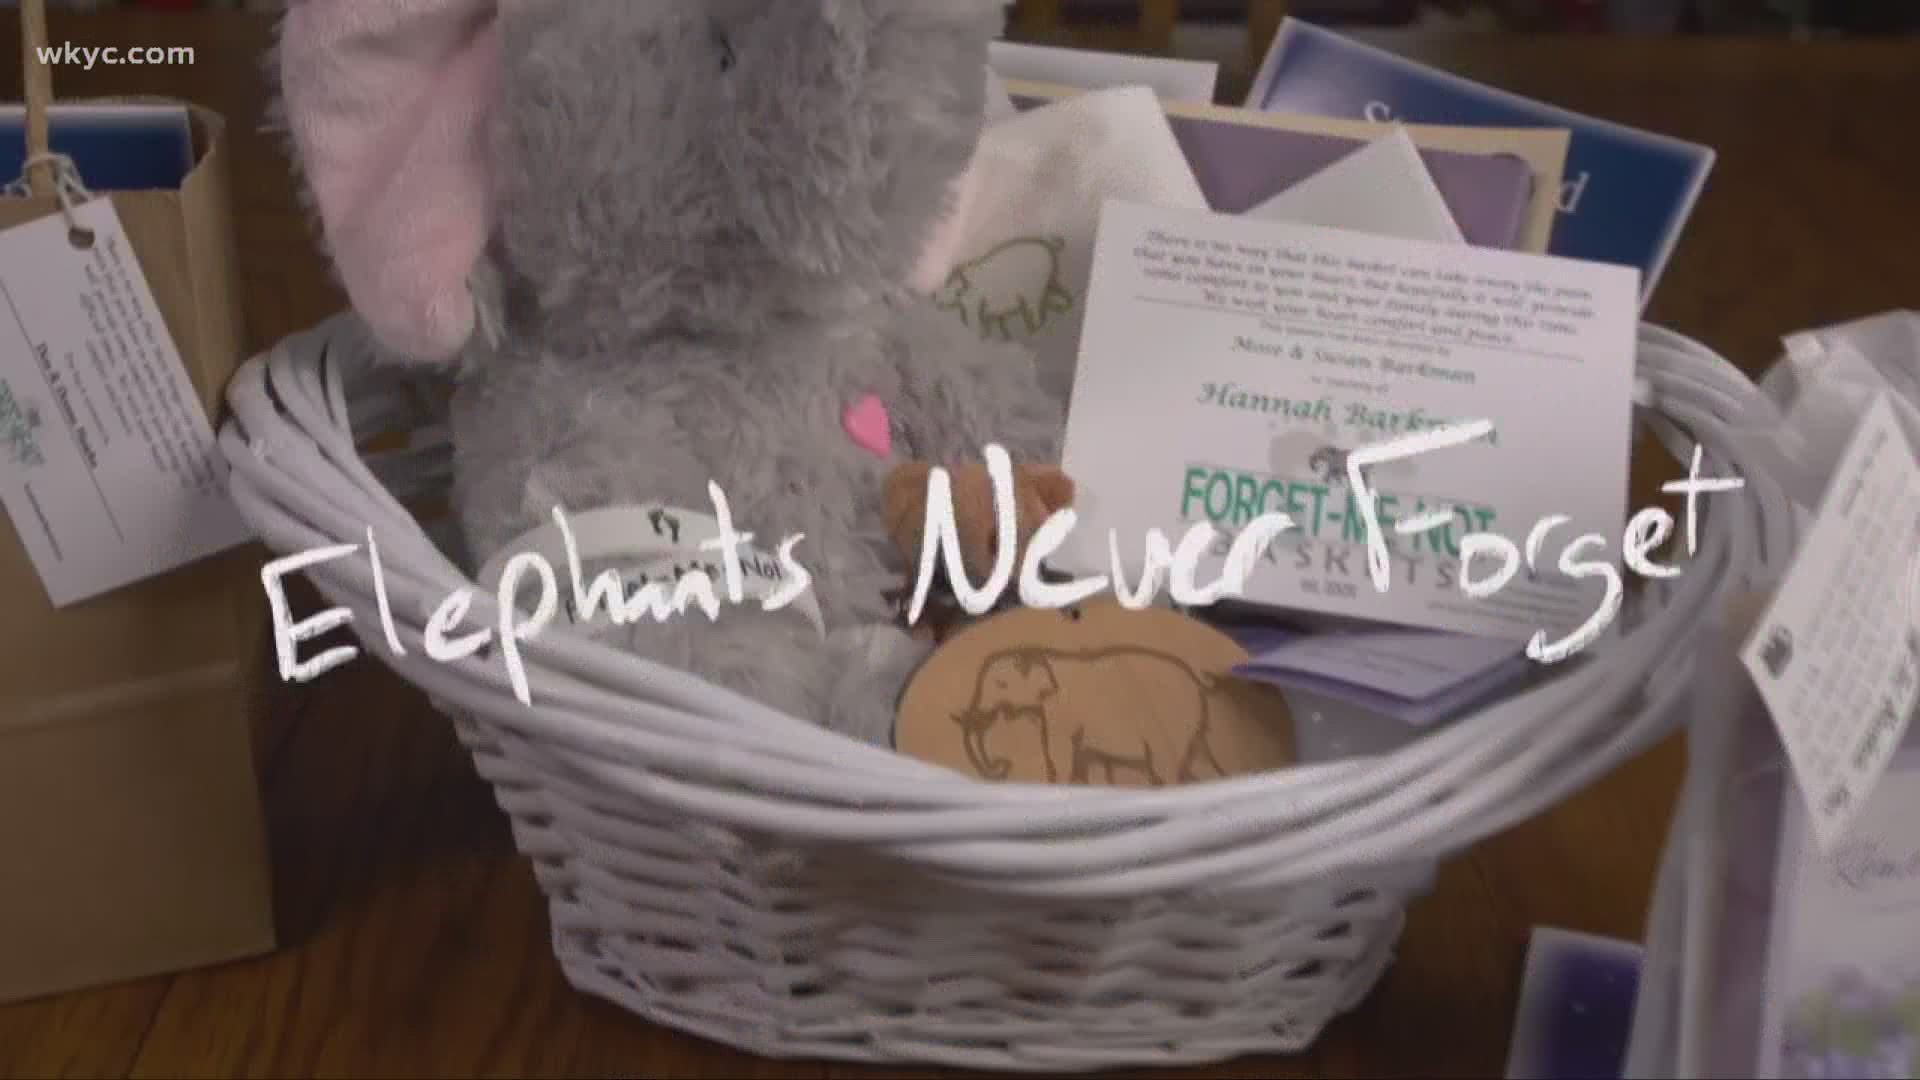 October is pregnancy and infant loss awareness month. Here's how Forget-Me-Not Baskets got its start to help grieving families through tough times.